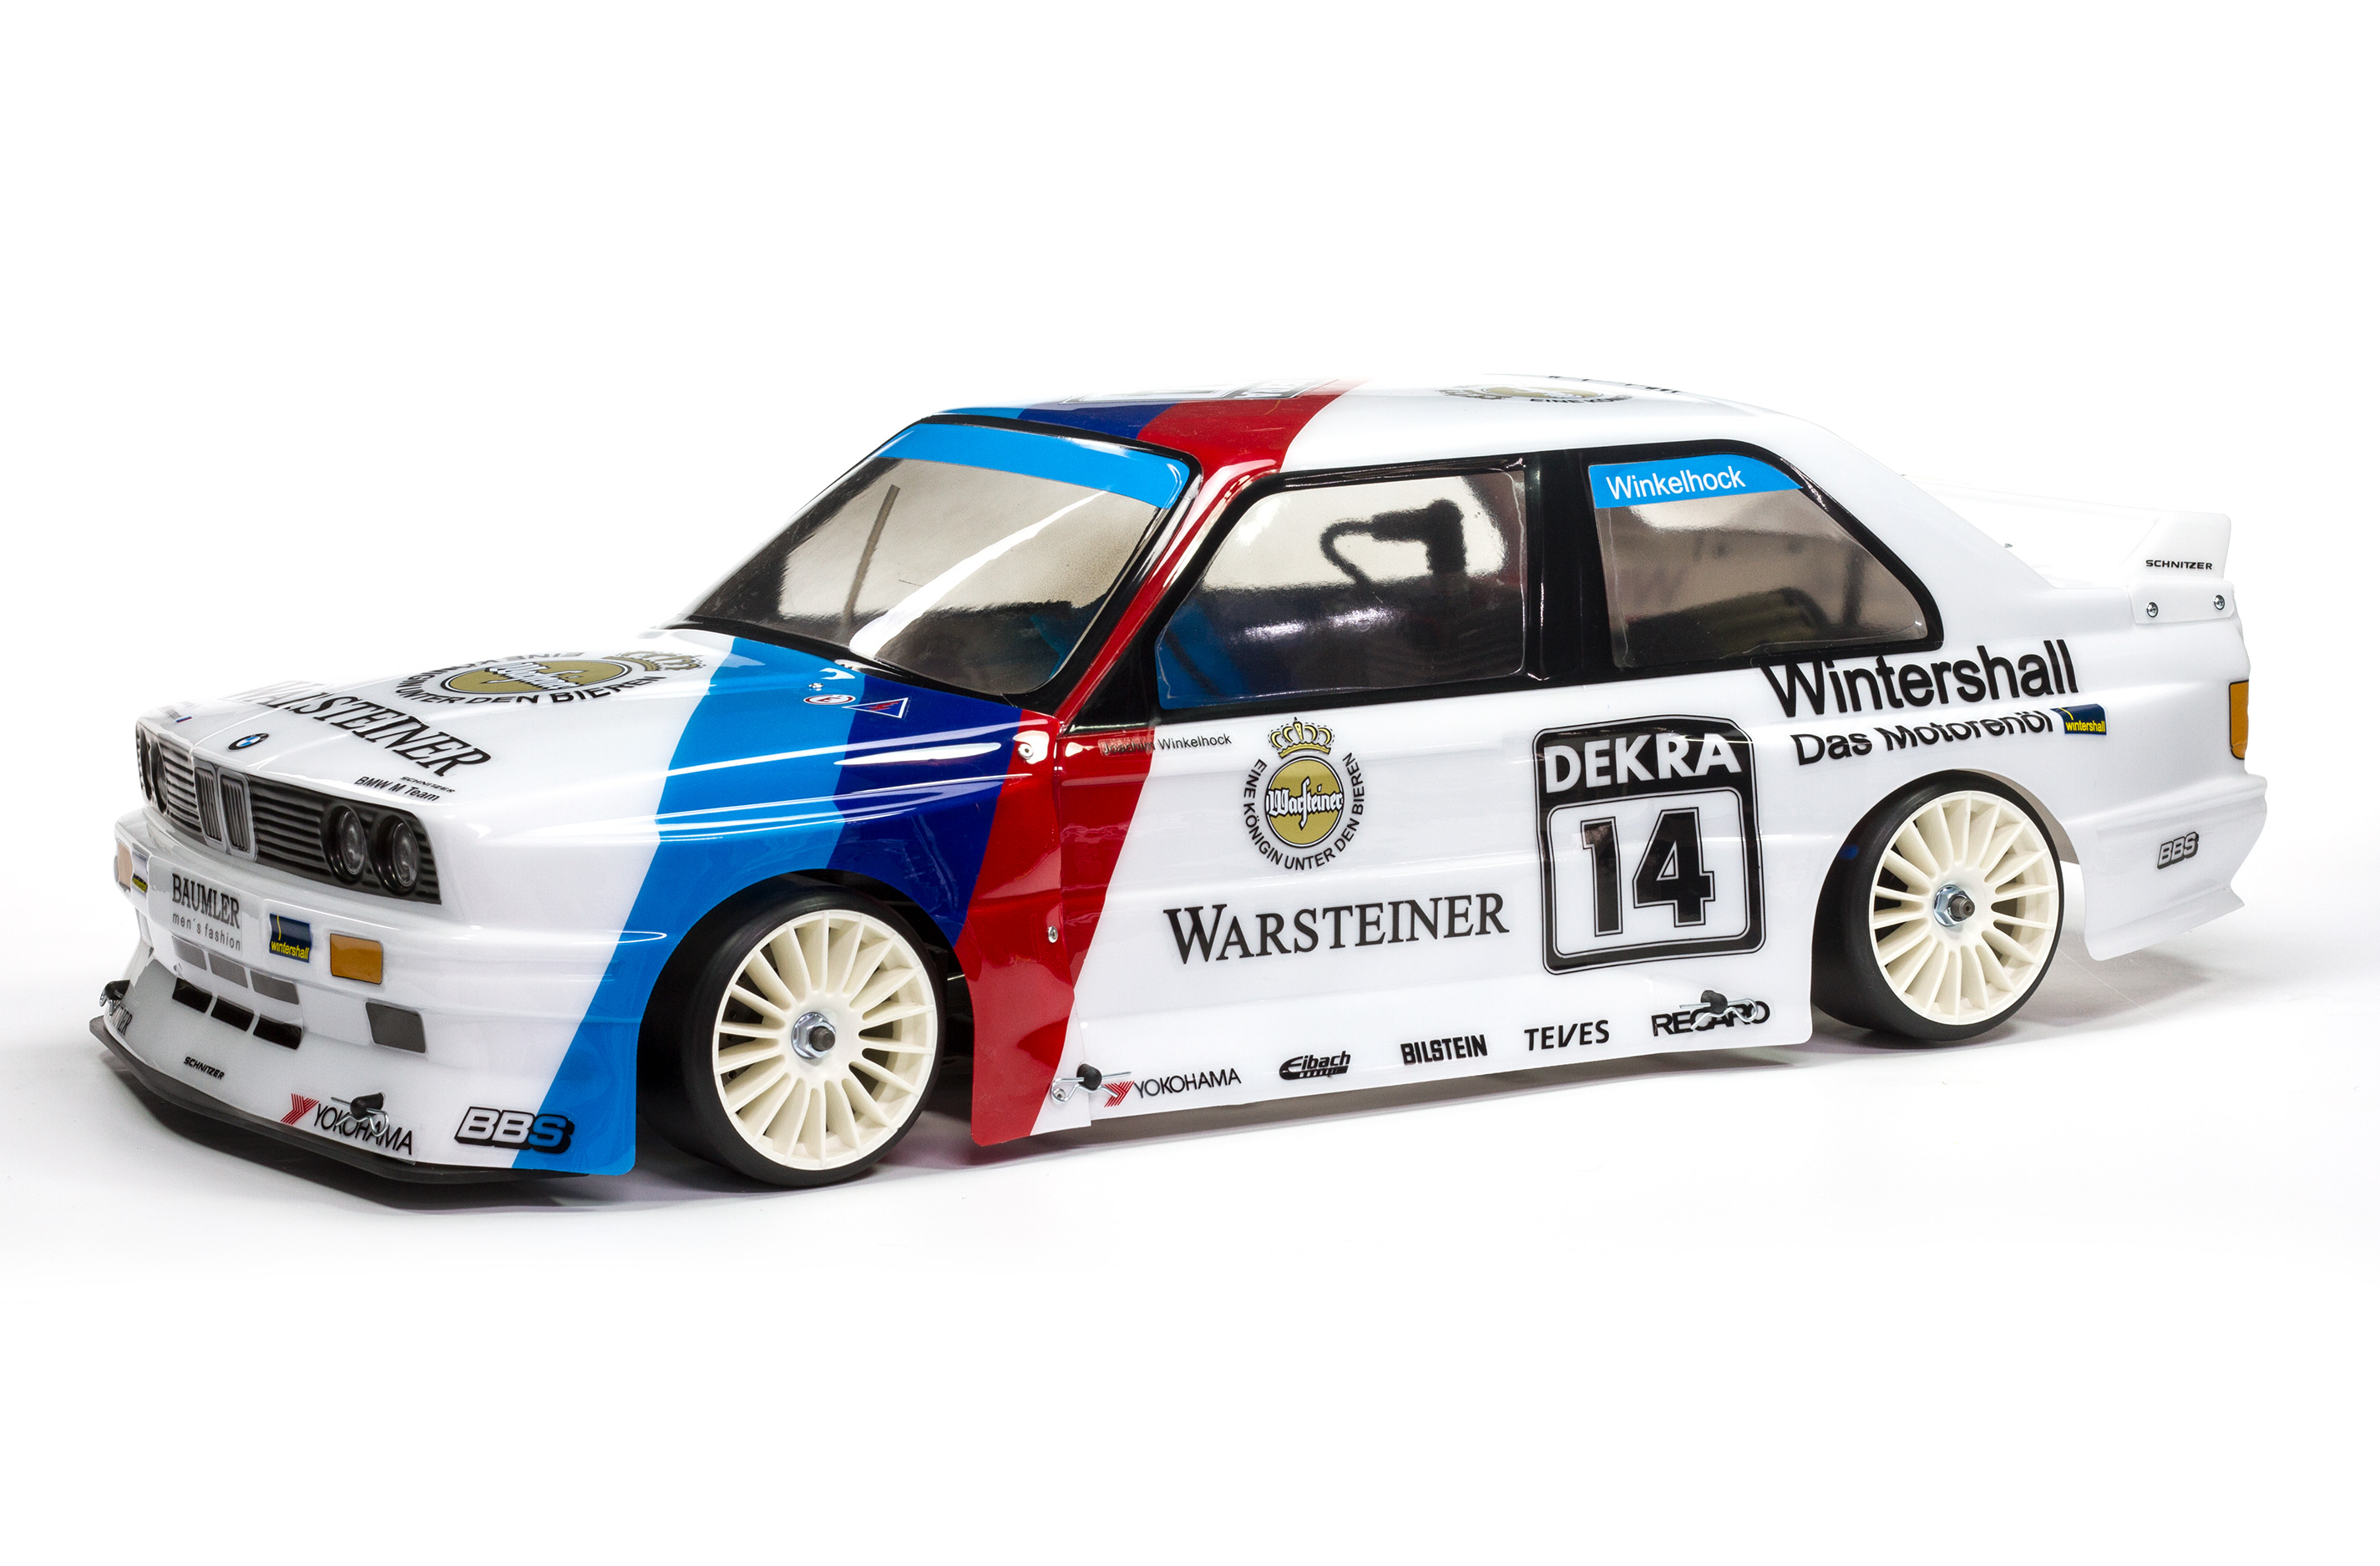 FG Sportsline Drift Chassis 4WD-510 with BMW E30 body